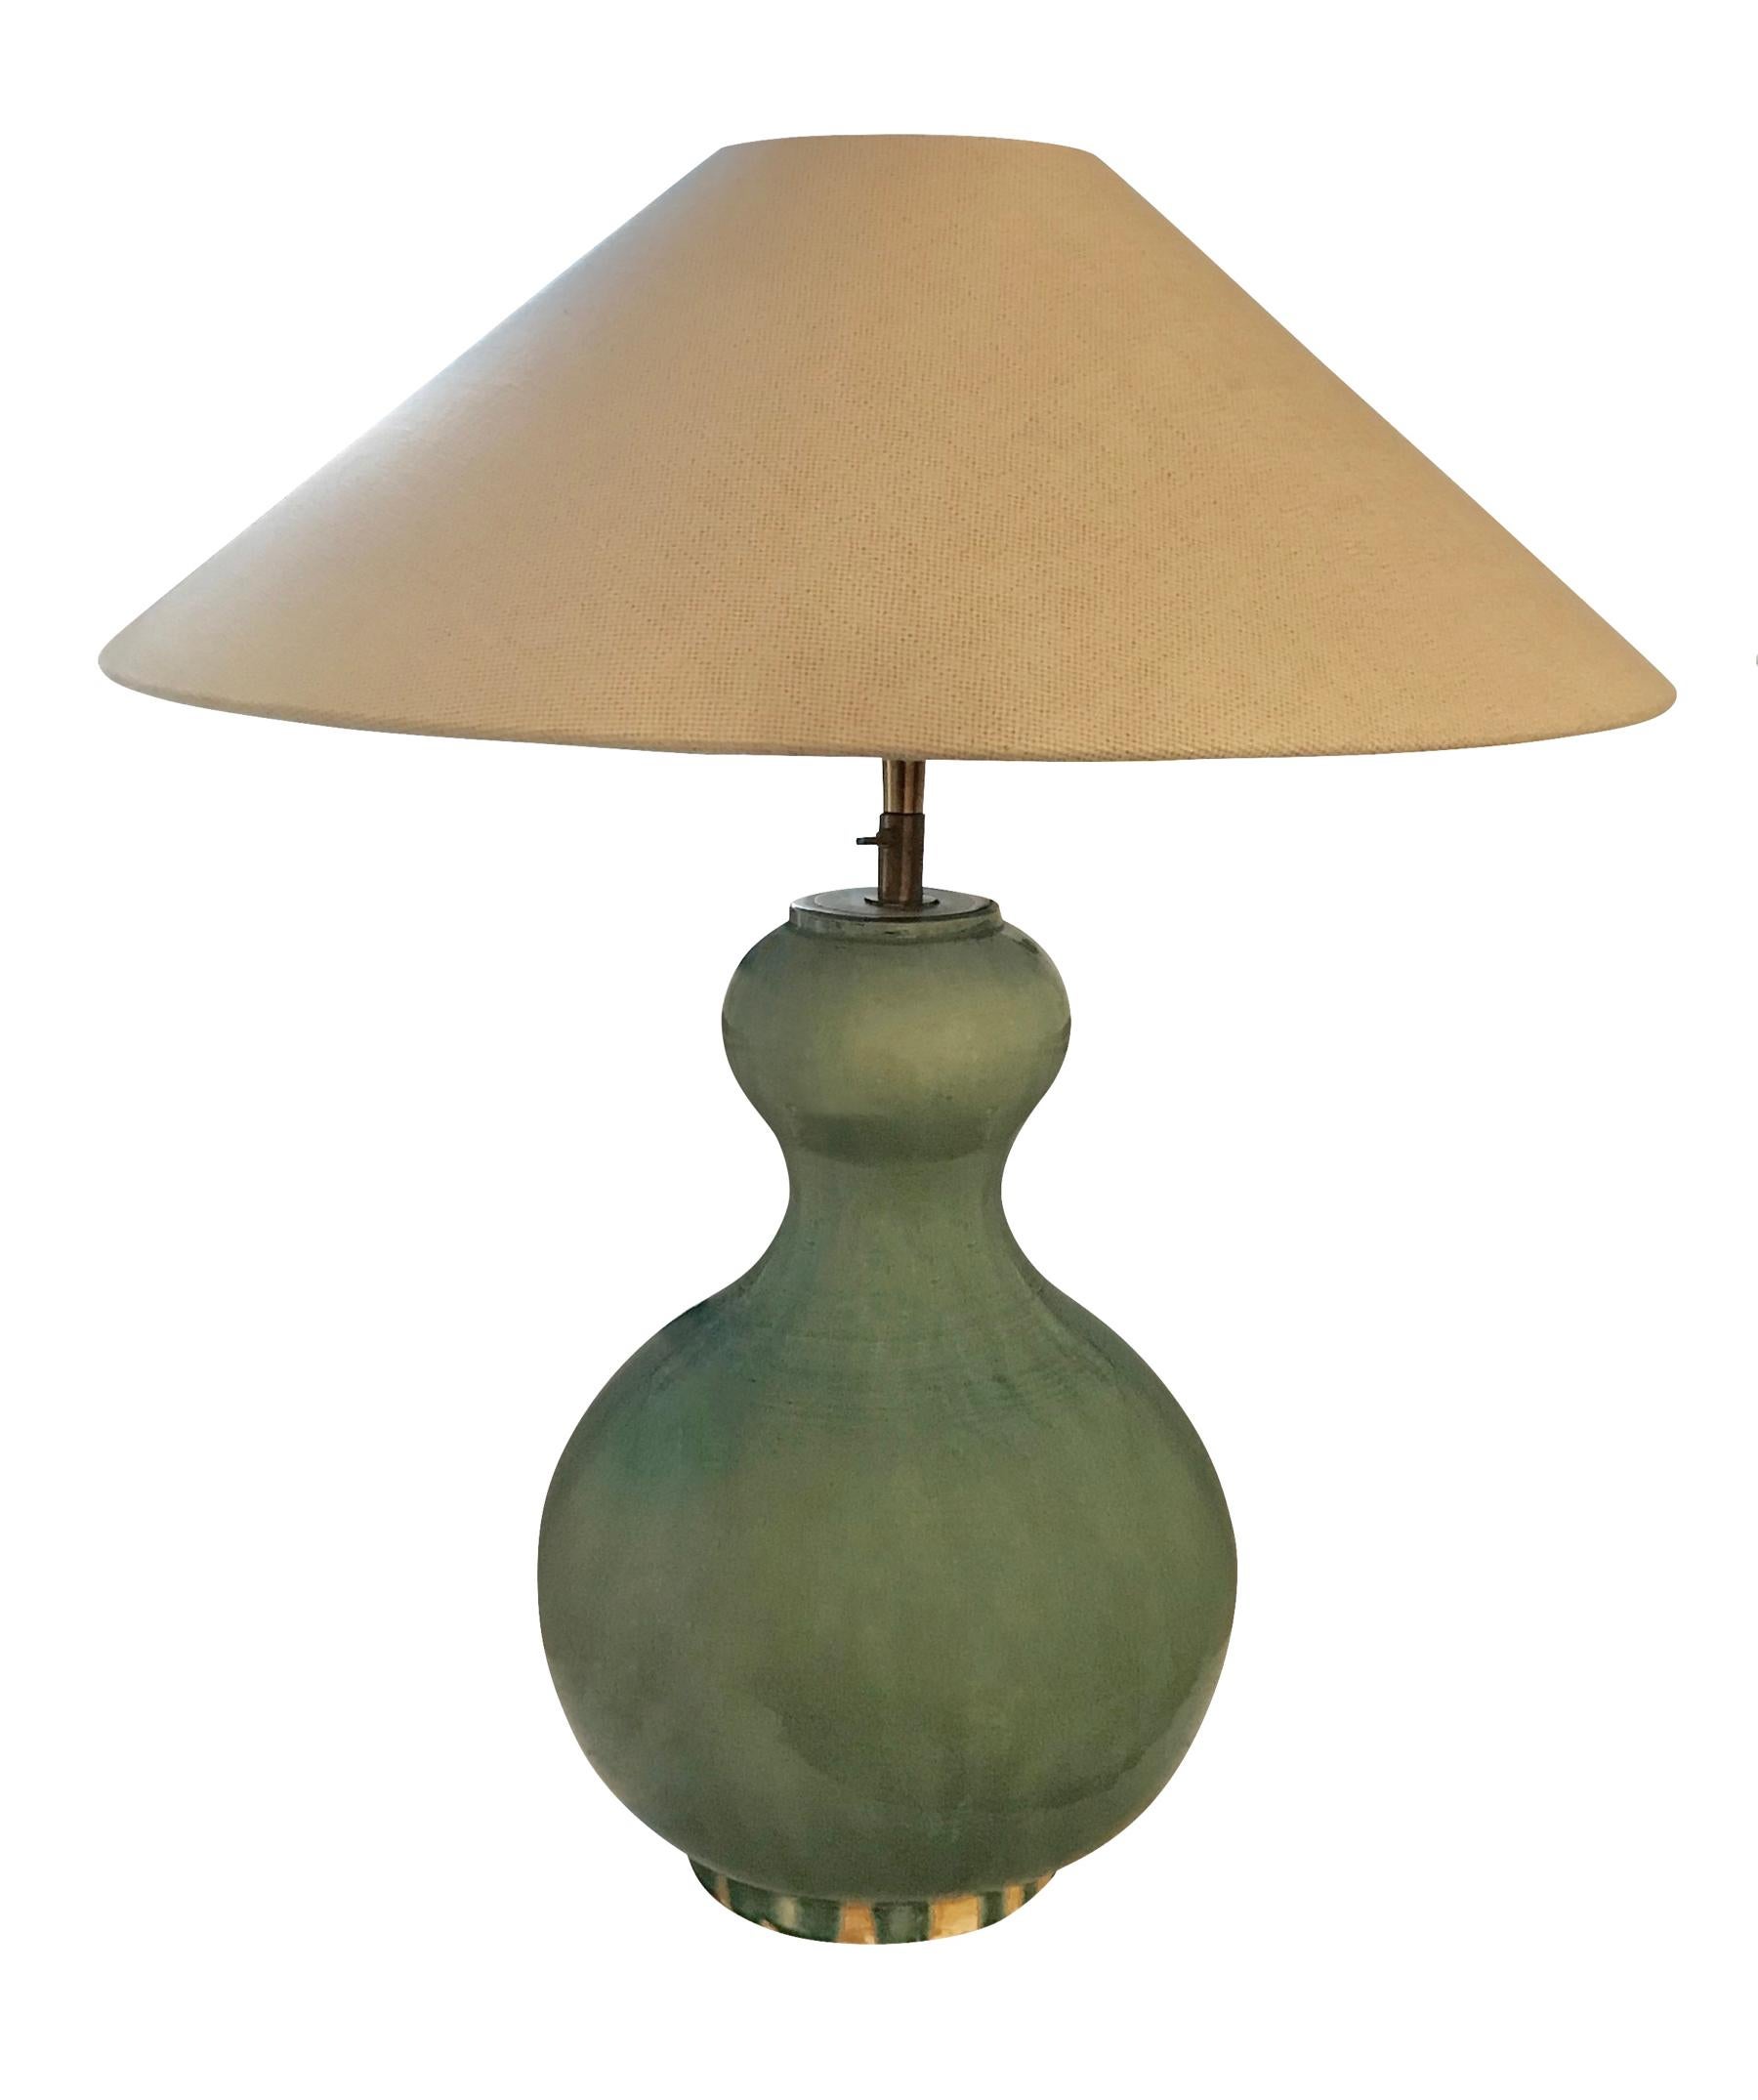 Chinese pair of washed turquoise color glazed lamps
Gourd shape
New Belgian linen shades
Measures: Overall height 24.5